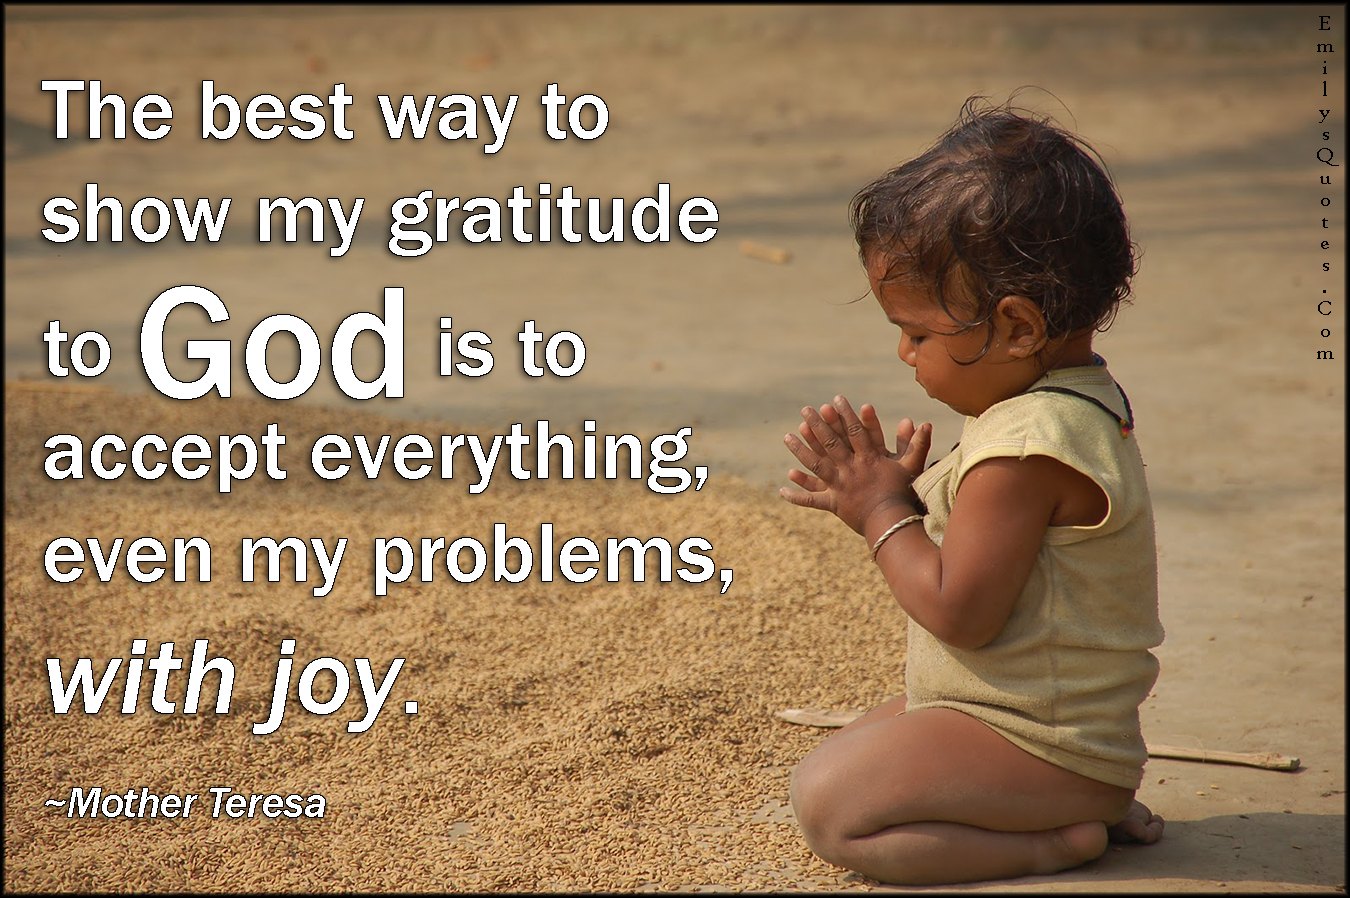 The best way to show my gratitude to God is to accept everything, even my problems, with joy